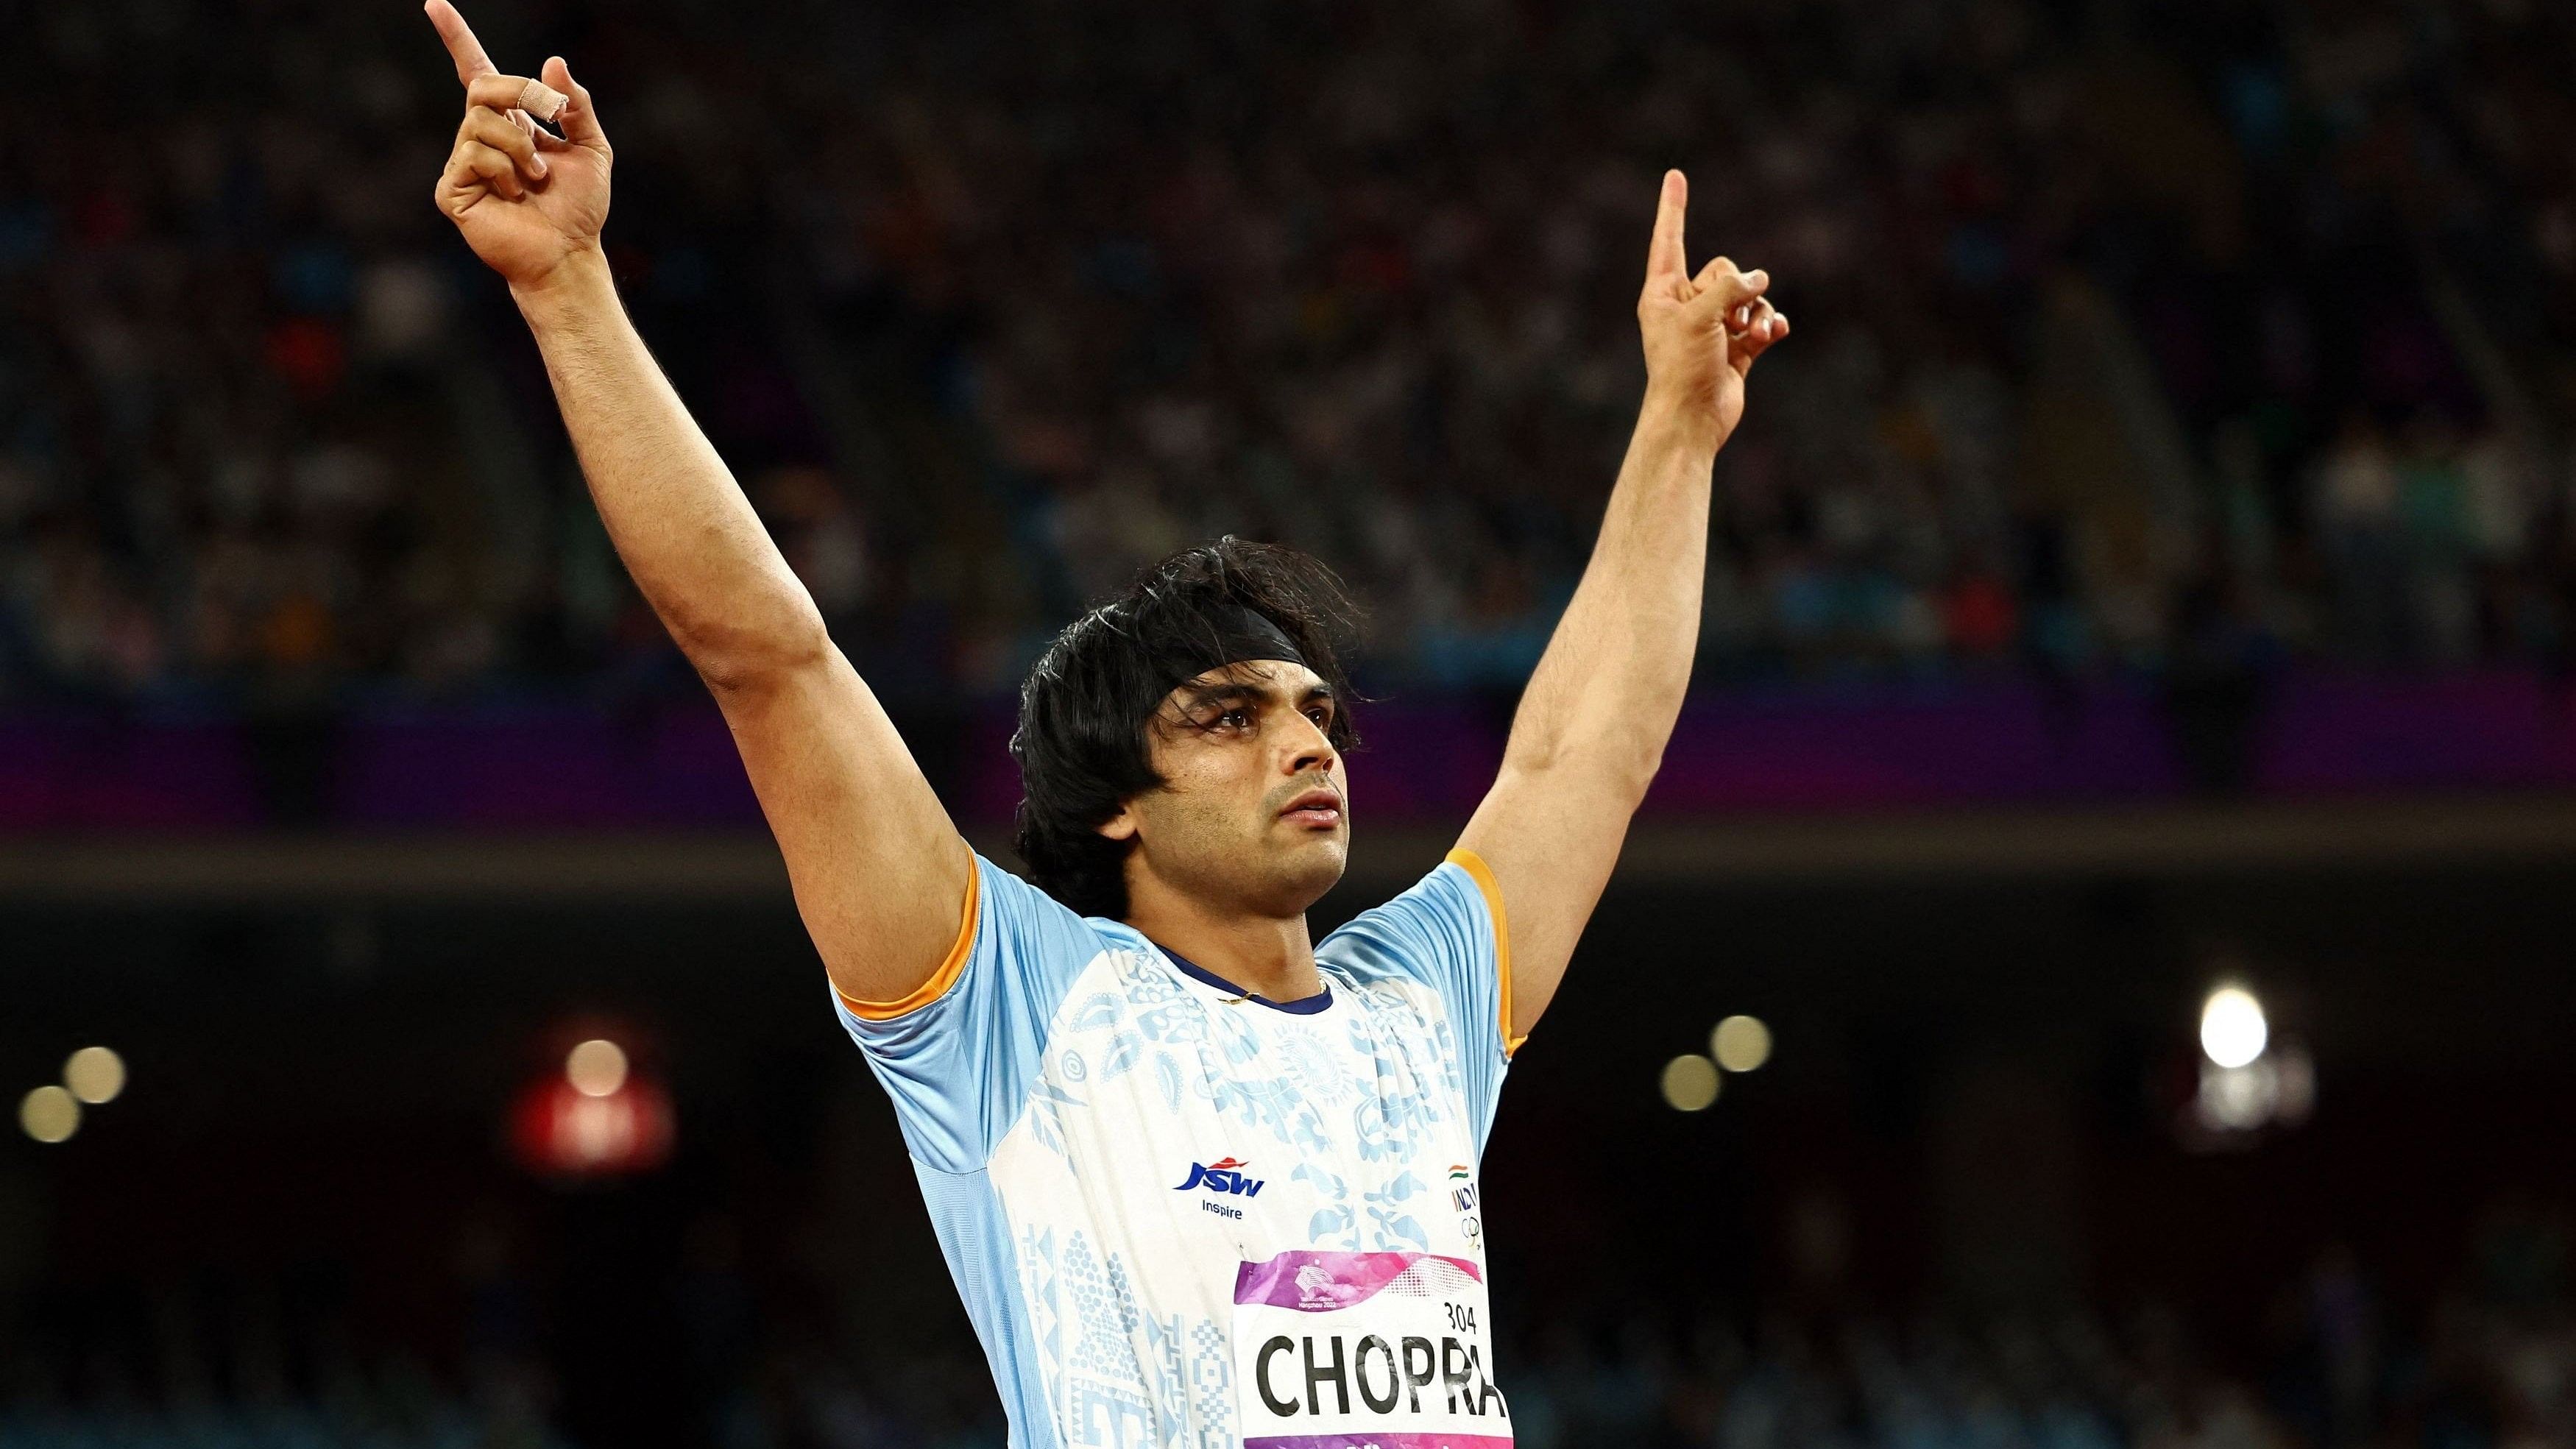 <div class="paragraphs"><p>Neeraj Chopra added that following the Tokyo Olympics success his "self-confidence" had really gone up.</p></div>